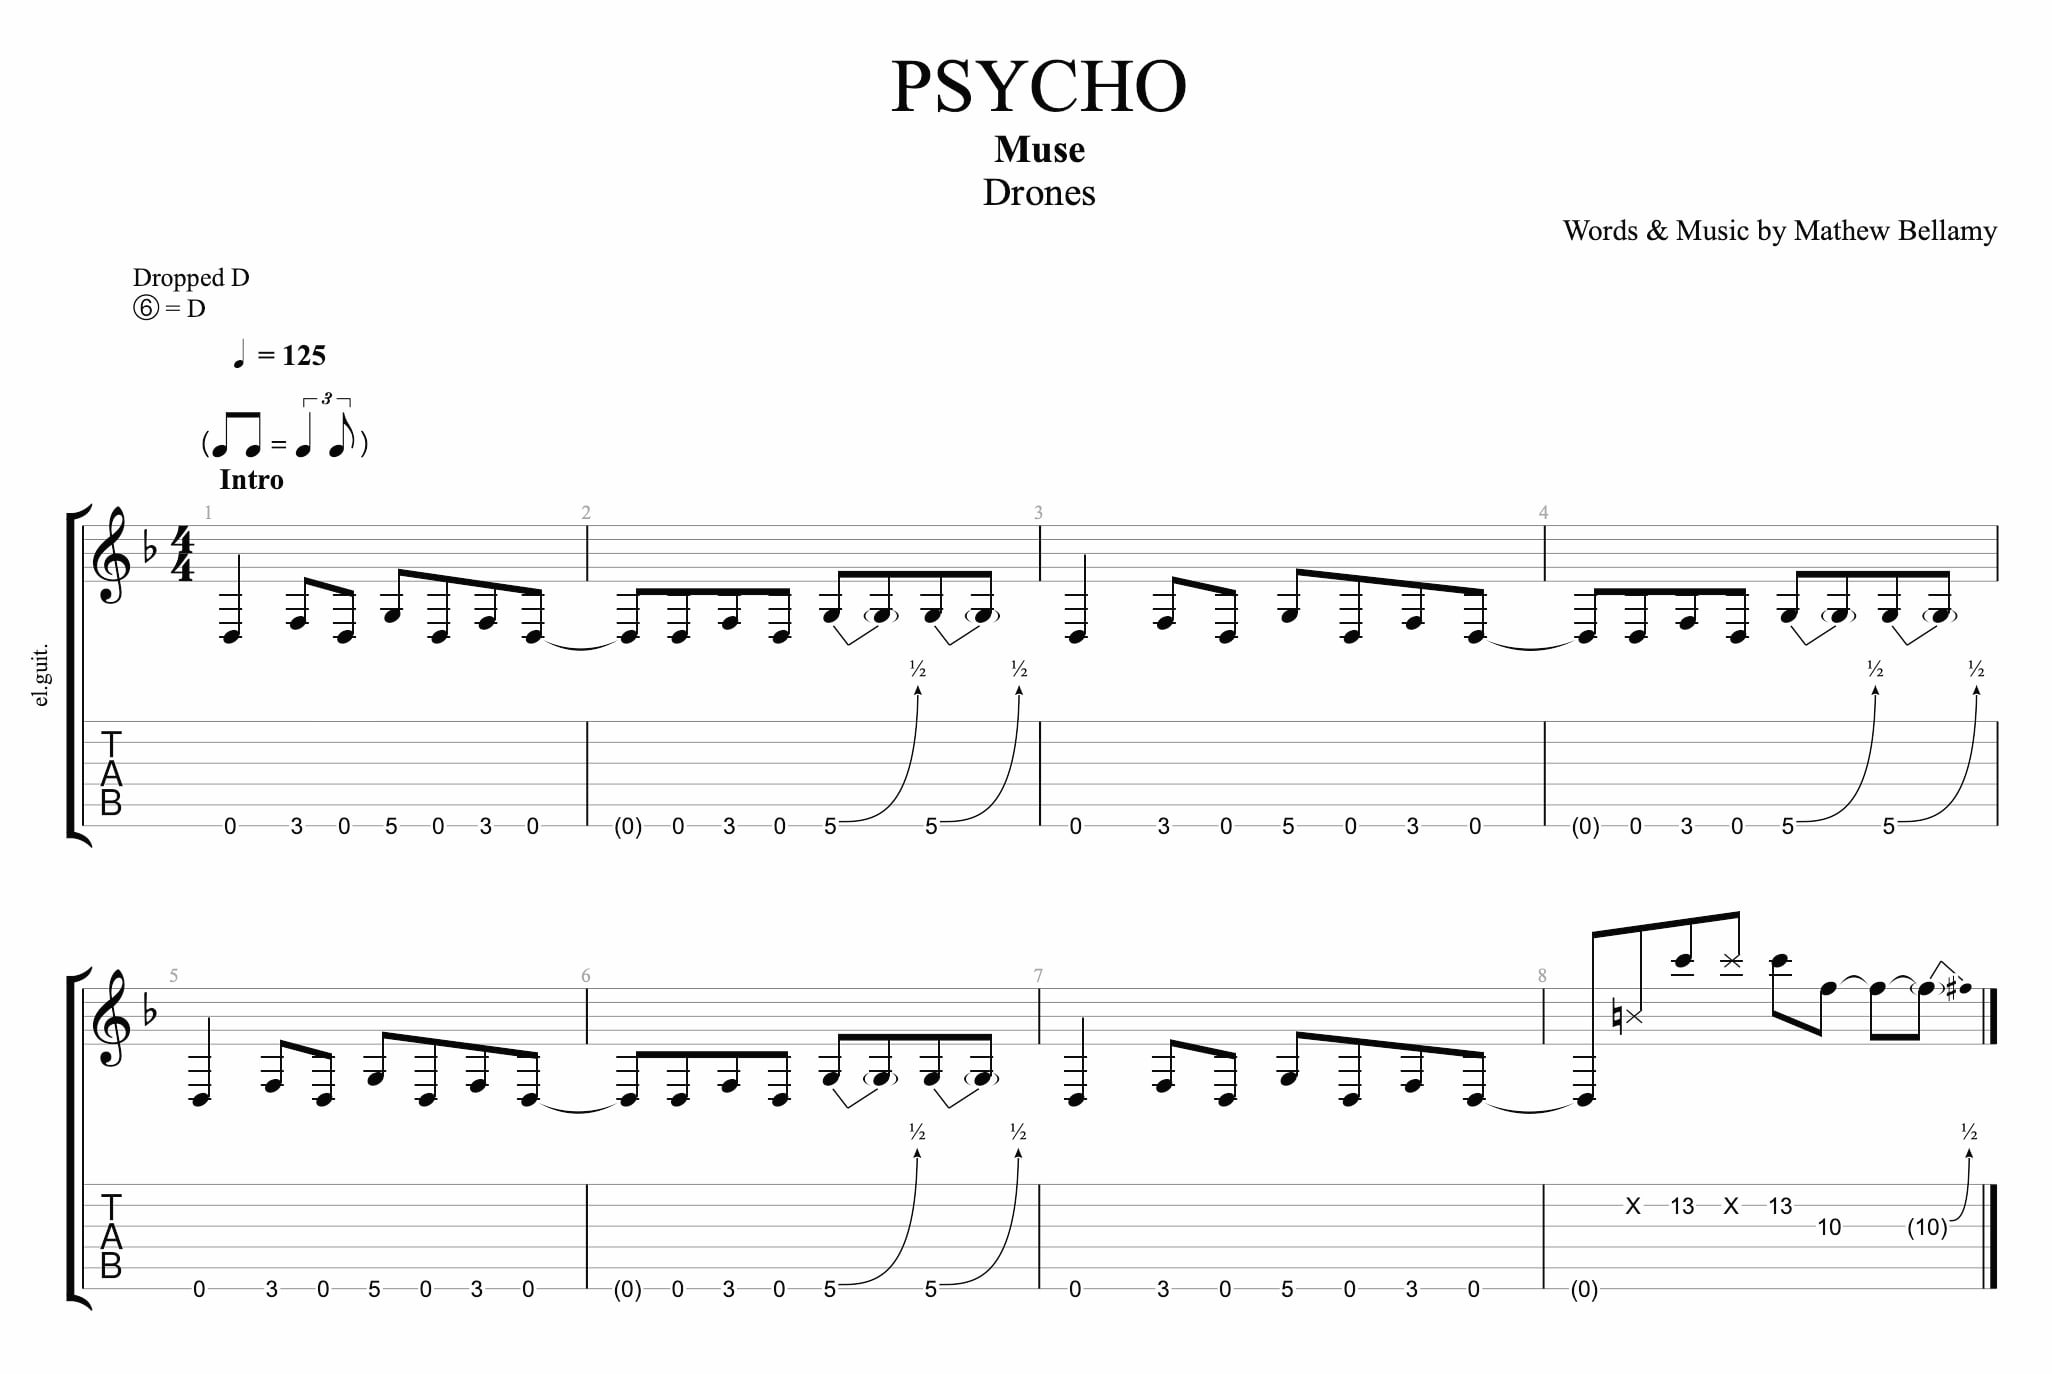 Muse psycho. Psycho Muse Drums Ноты. Muse Drones Psycho. Psycho Muse обложка.